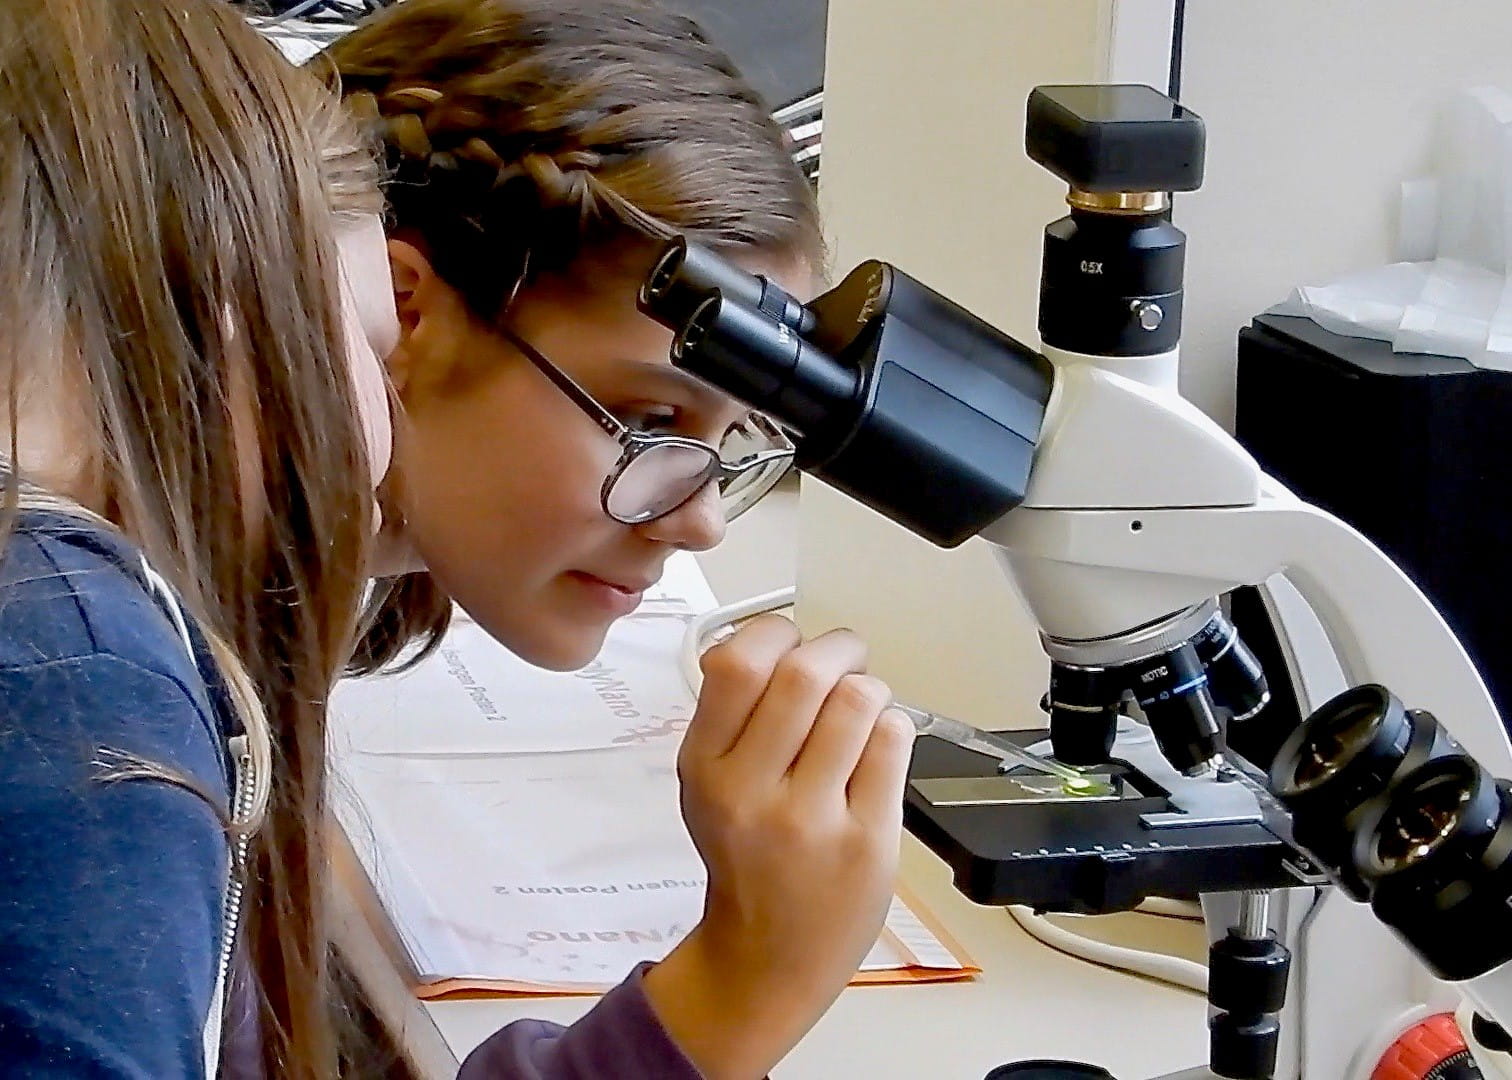 Student leans in while using a microscope